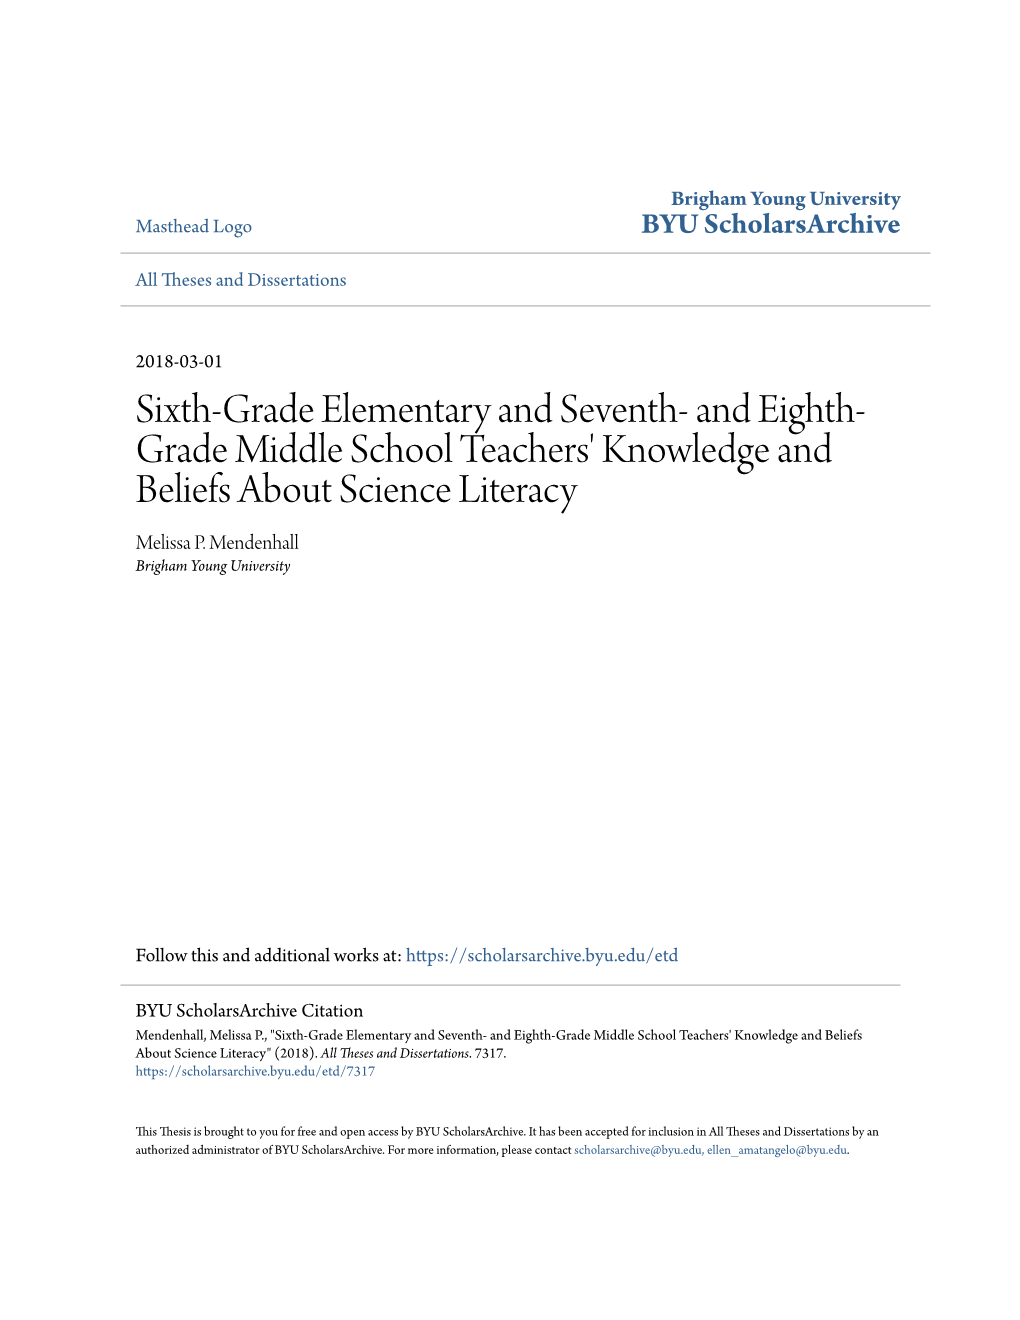 Sixth-Grade Elementary and Seventh- and Eighth- Grade Middle School Teachers' Knowledge and Beliefs About Science Literacy Melissa P